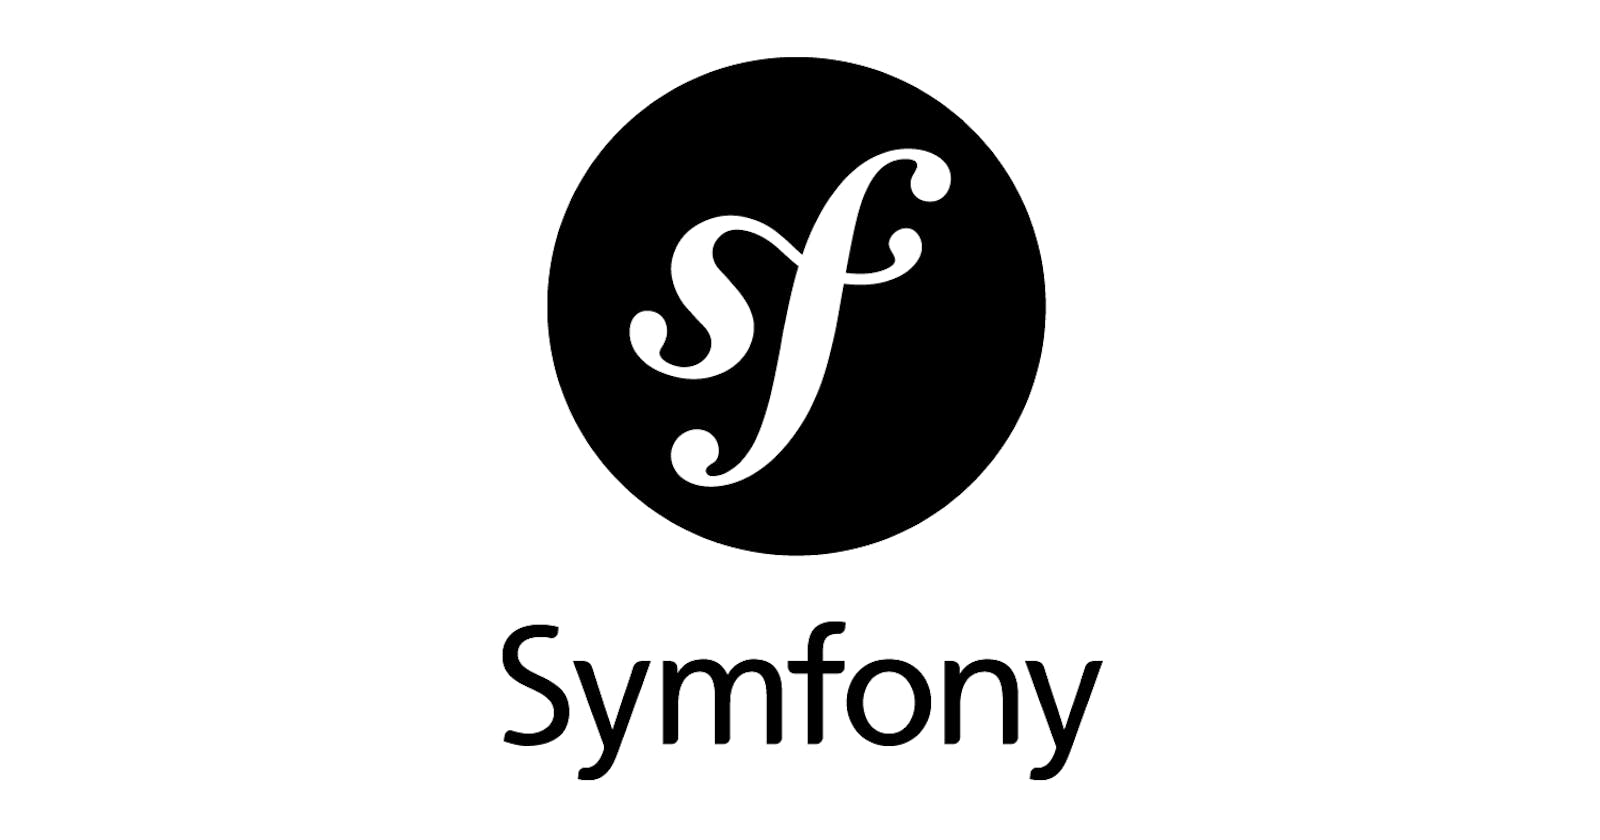 Validating requests in the Symfony app